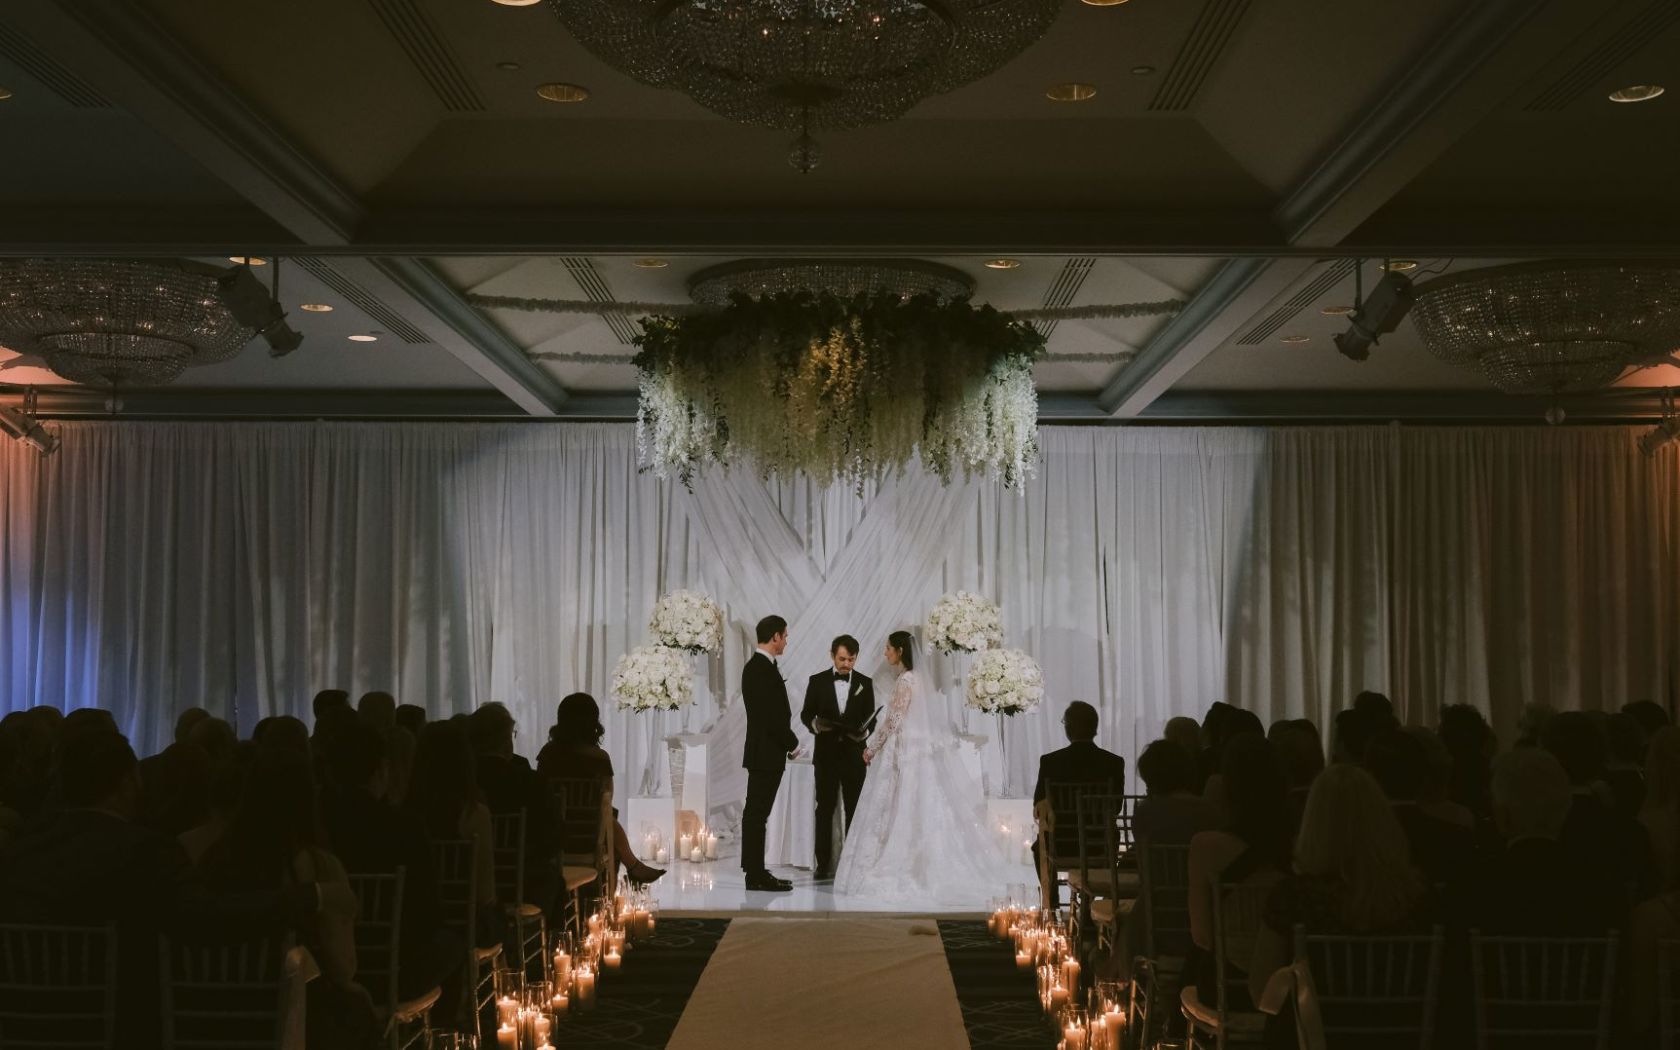 A Wedding Ceremony In A Large Room